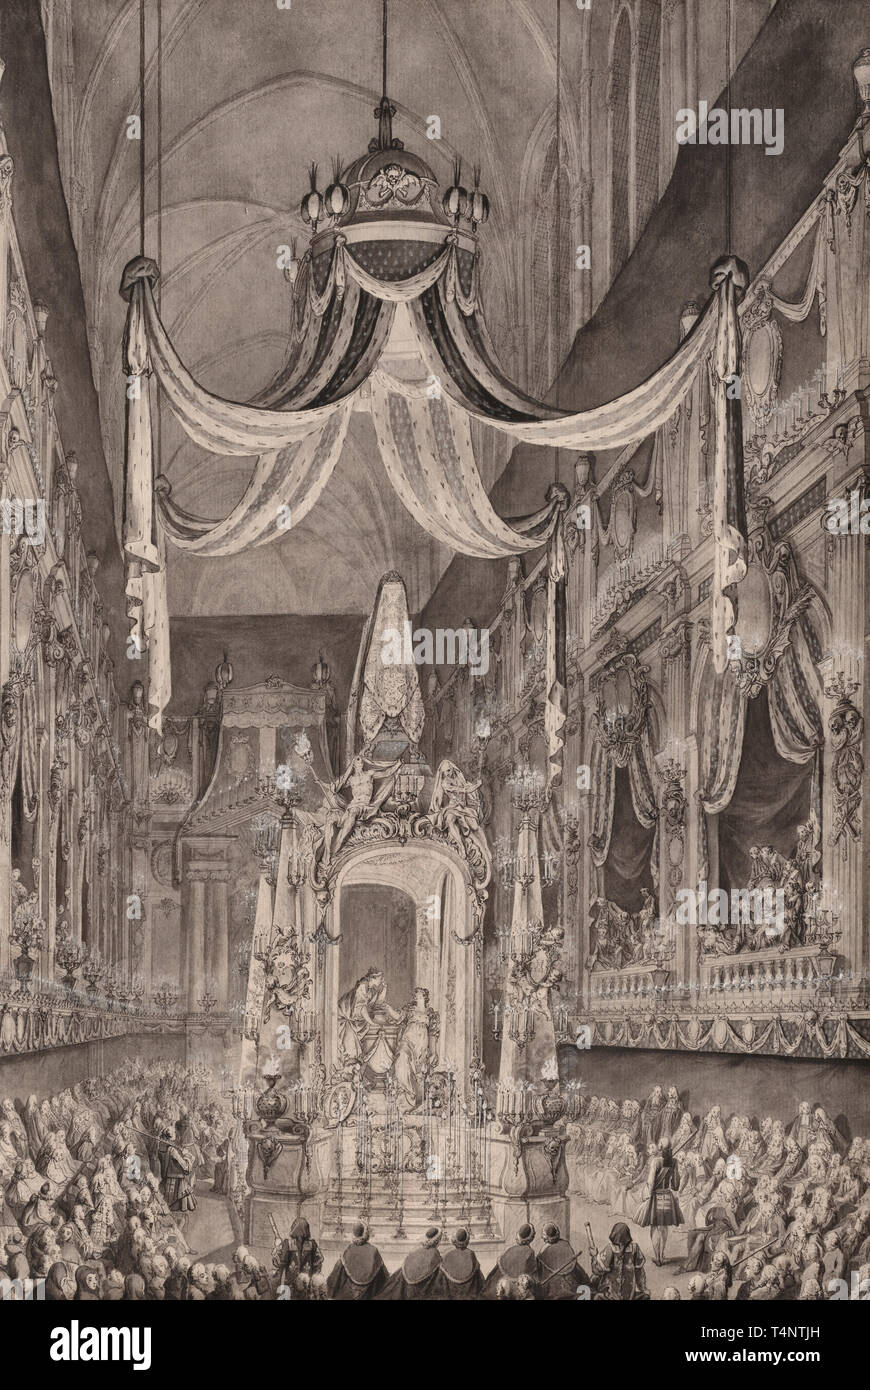 Funeral for Marie-Thérèse of Spain, Dauphine of France, in the Church of Nôtre Dame, Paris, on November 24, 1746 - Charles-Nicolas Cochin Stock Photo